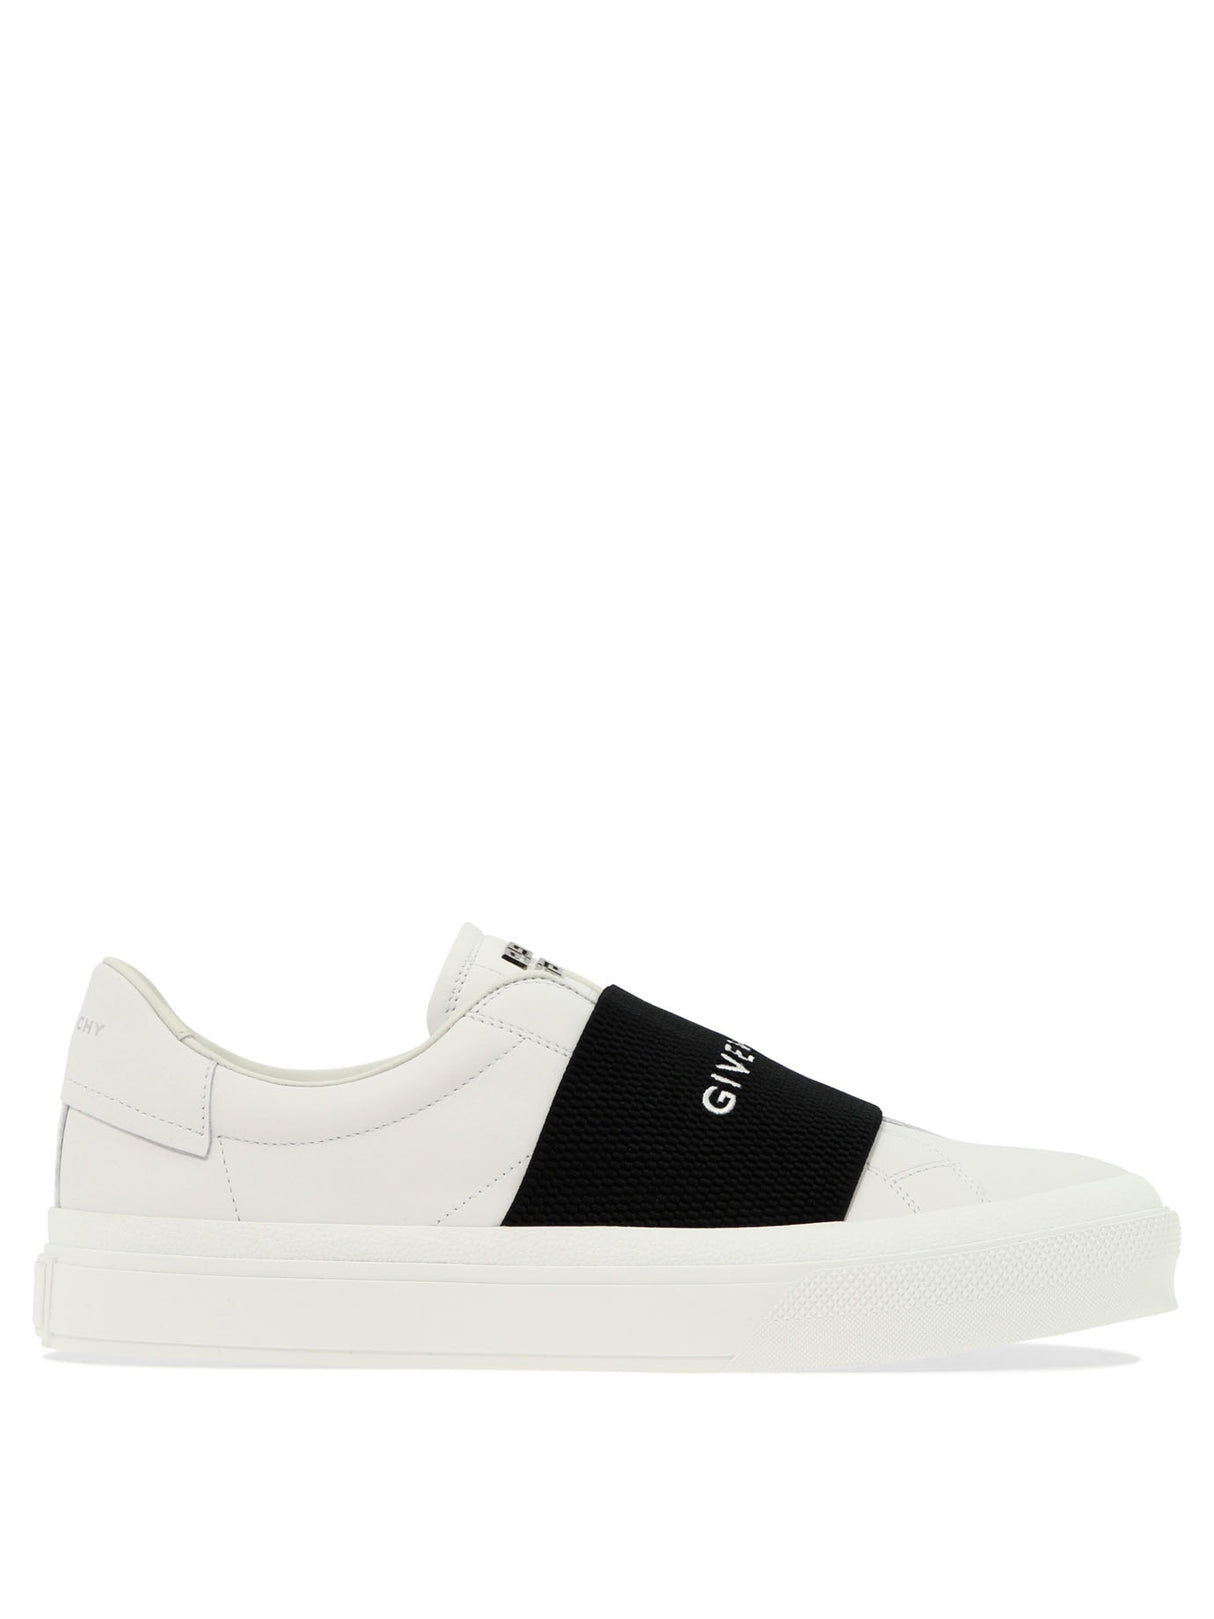 GIVENCHY "NEW CITY" Sneaker